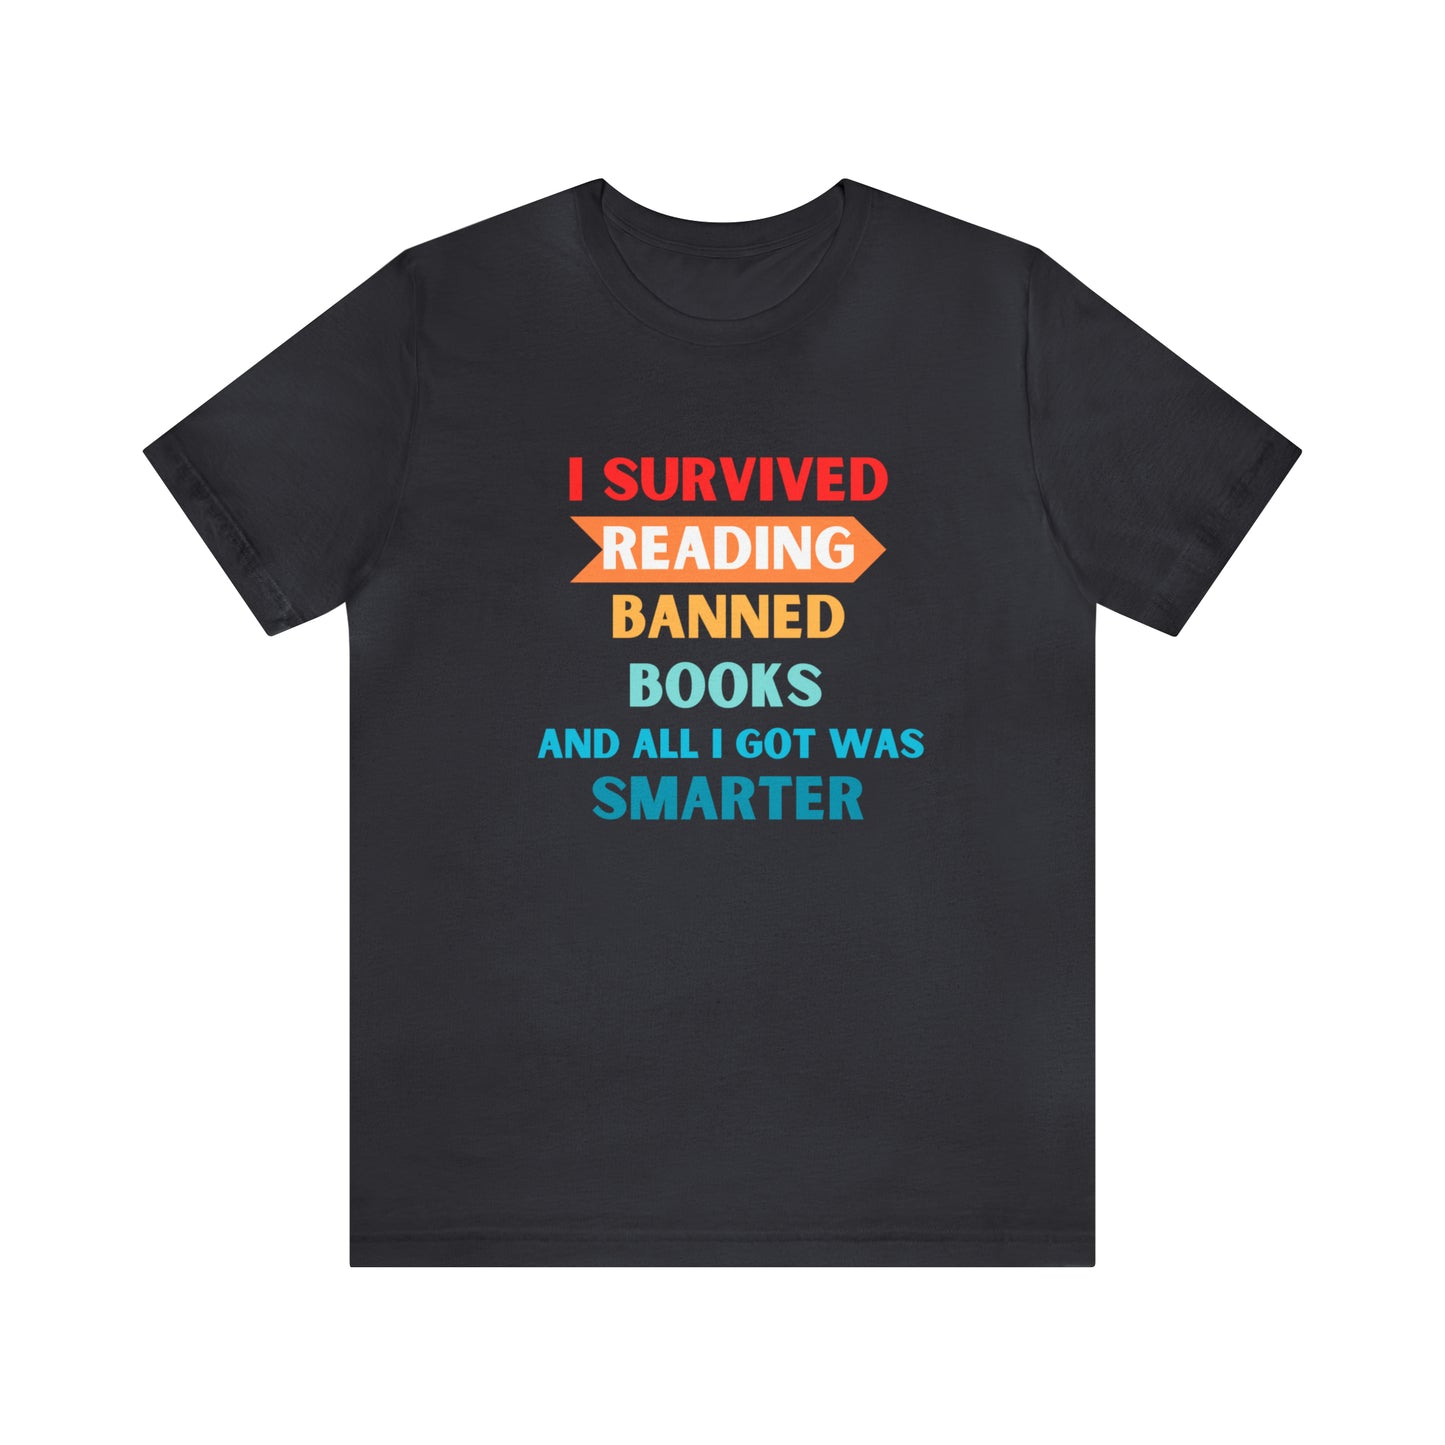 I Survived Reading Banned Books And All I Got Was Smarter, Library Tshirt, book lover, bookish, librarian gift, gift for reader